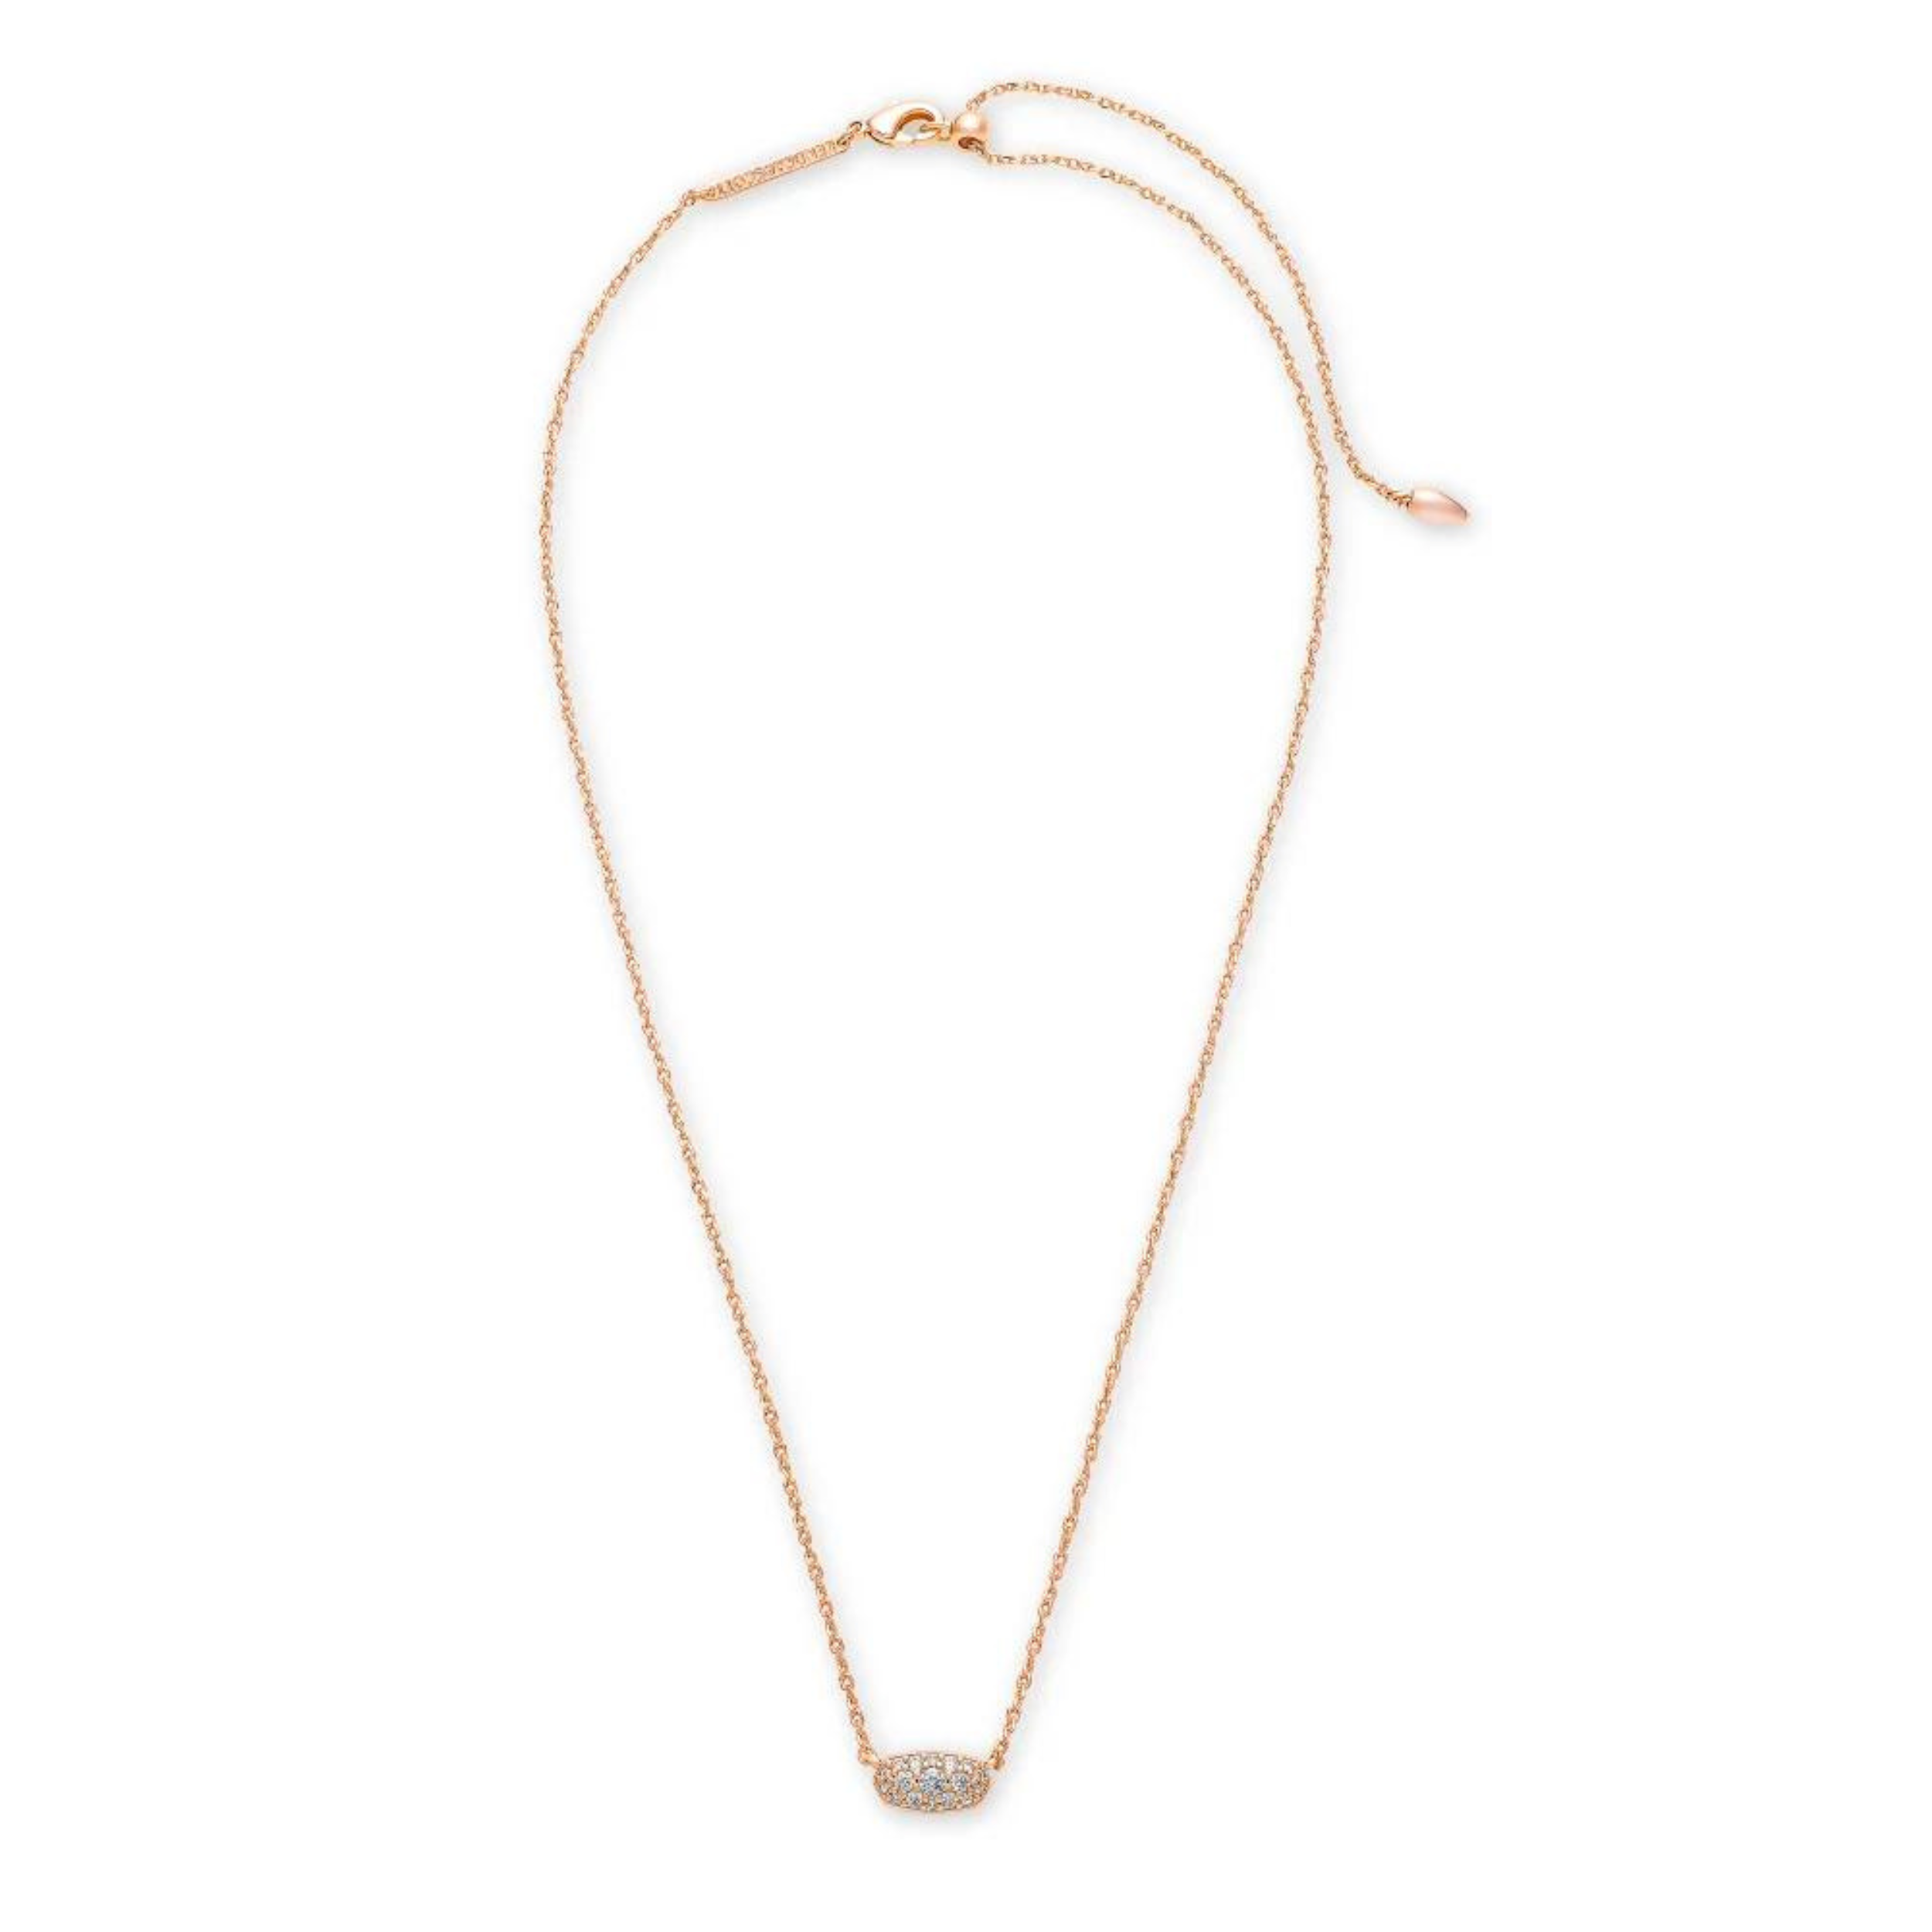 Kendra Scott | Grayson Rose Gold Pendant Necklace in White Crystal - Giddy Up Glamour Boutique